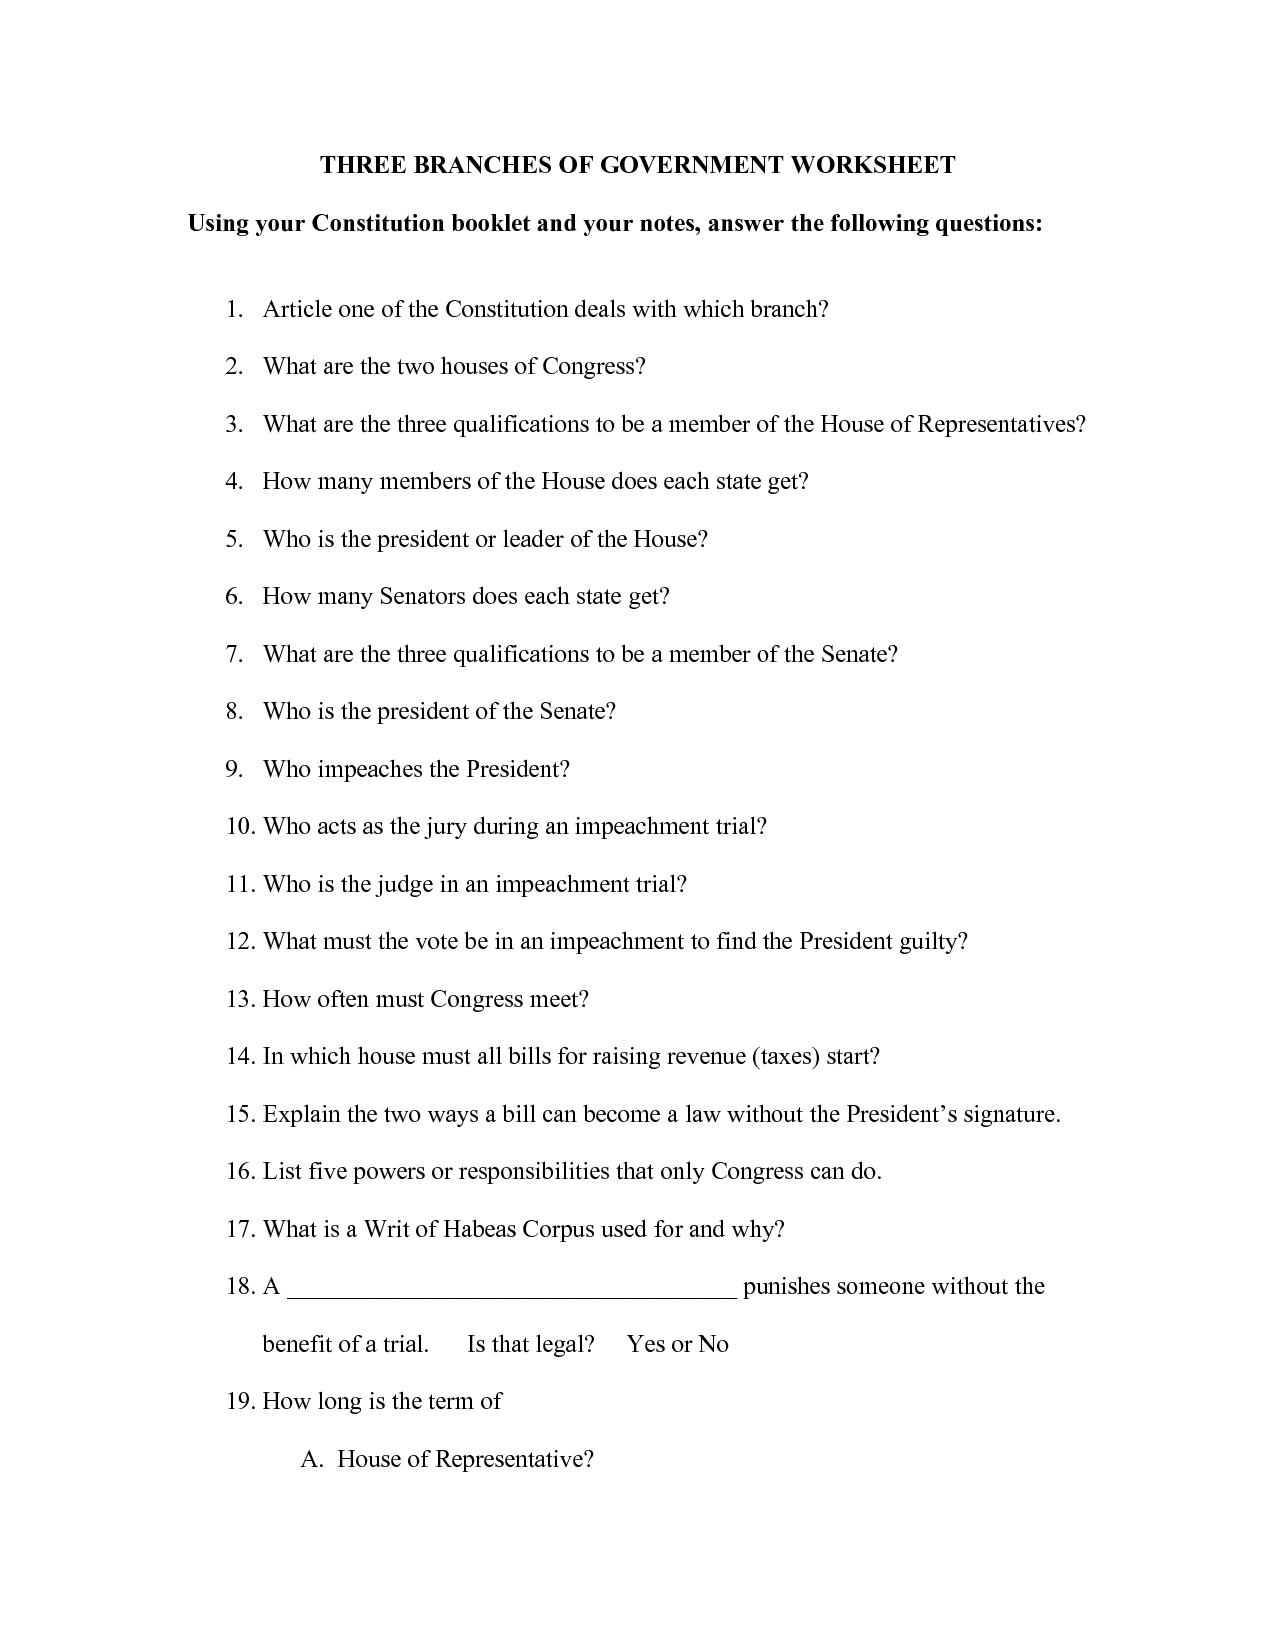 Branches of Government Worksheet.pdf Image